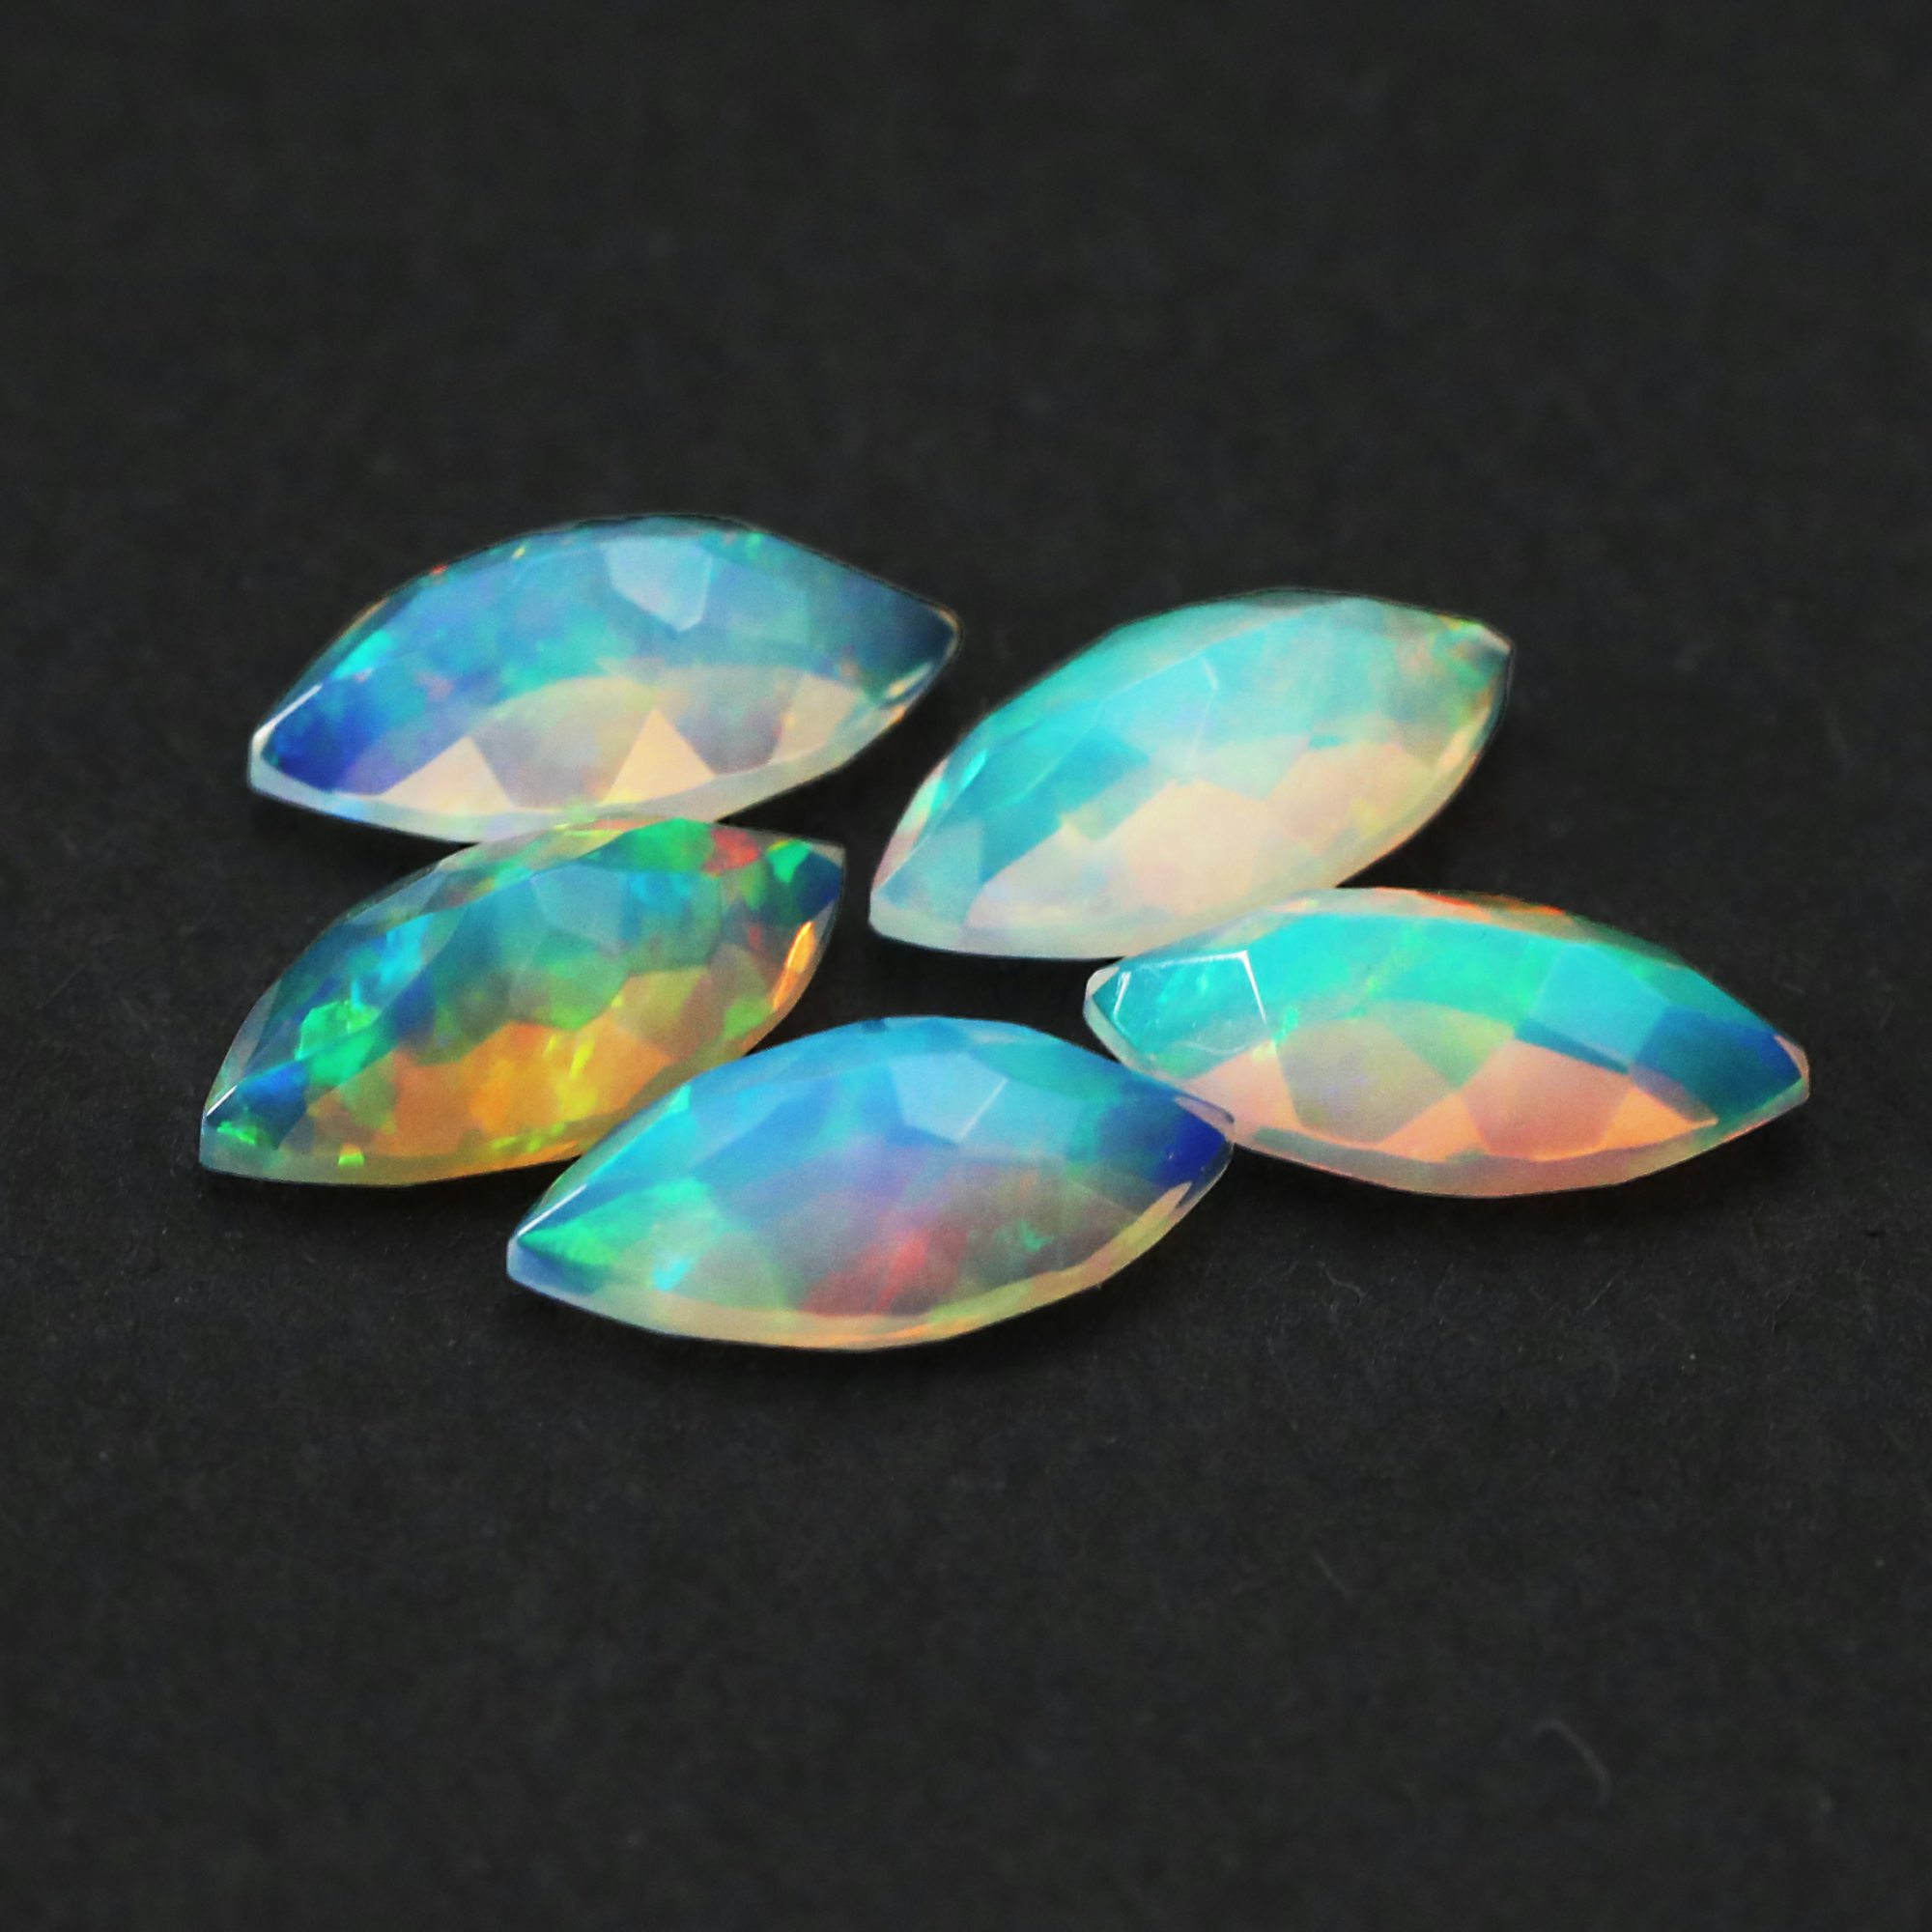 1Pcs 5x10MM Marquise Cut Natural Africa Opal October Birthstone Faceted Gemstone Mood Color Change Stone DIY Jewelry Supplies 4160036 - Click Image to Close